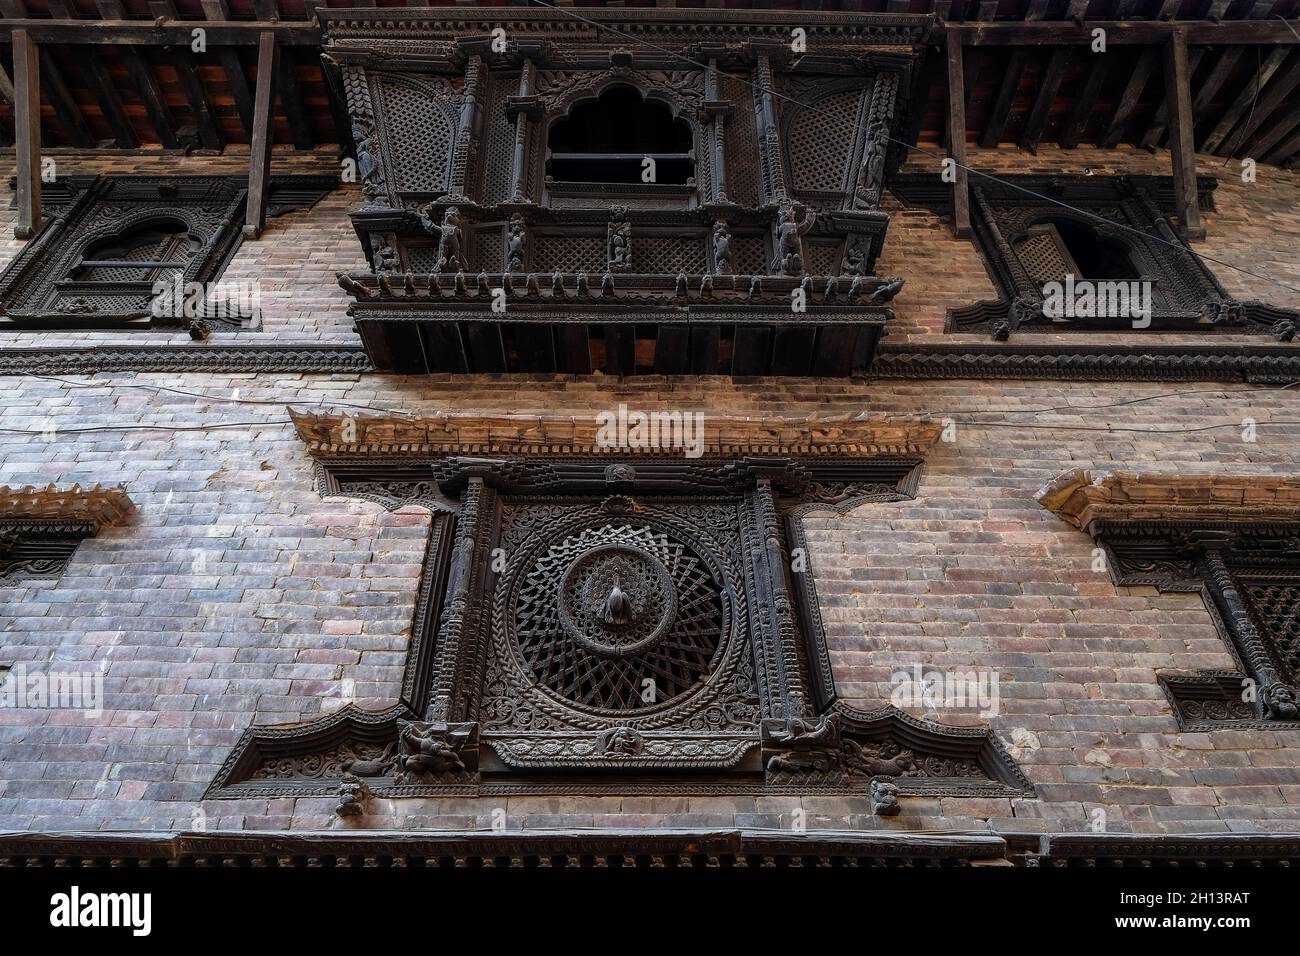 Peacock Window is an ornate wooden windows have been described as a symbol of Newar culture and artistry in Bhaktapur, Nepal Stock Photo